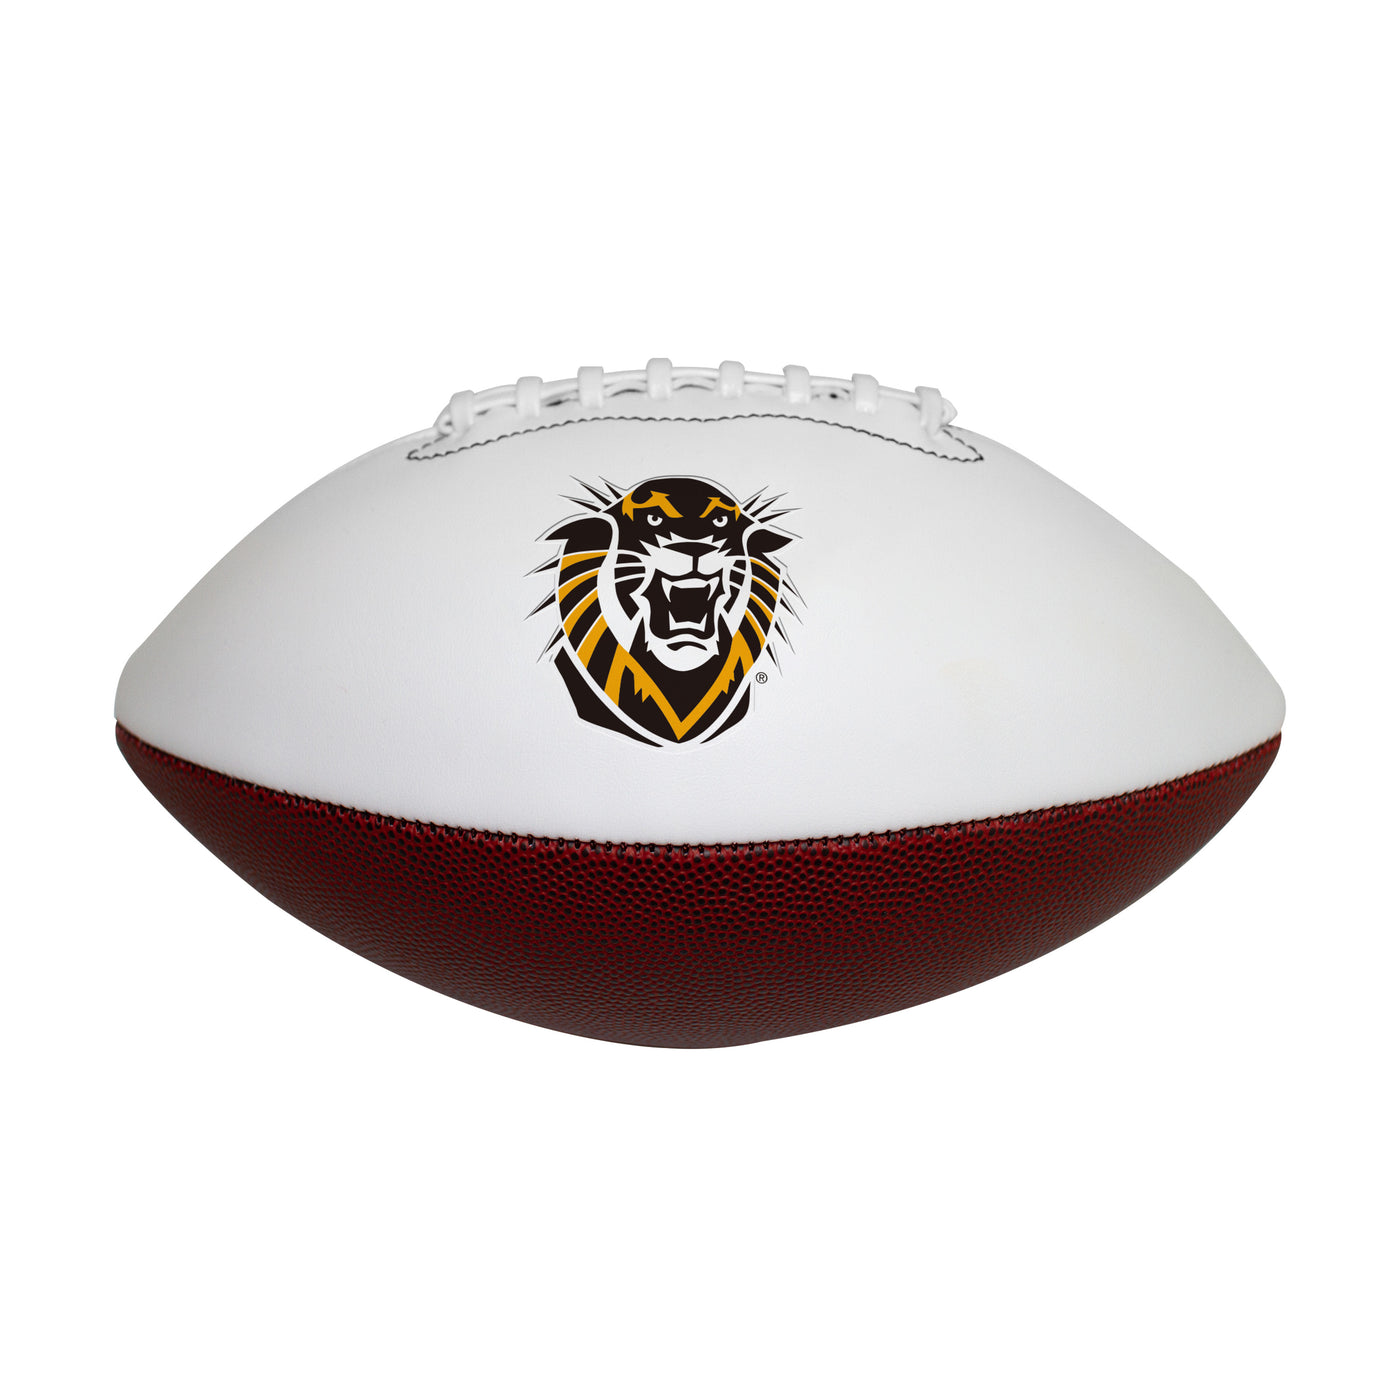 Fort Hays State Official-Size Autograph Football